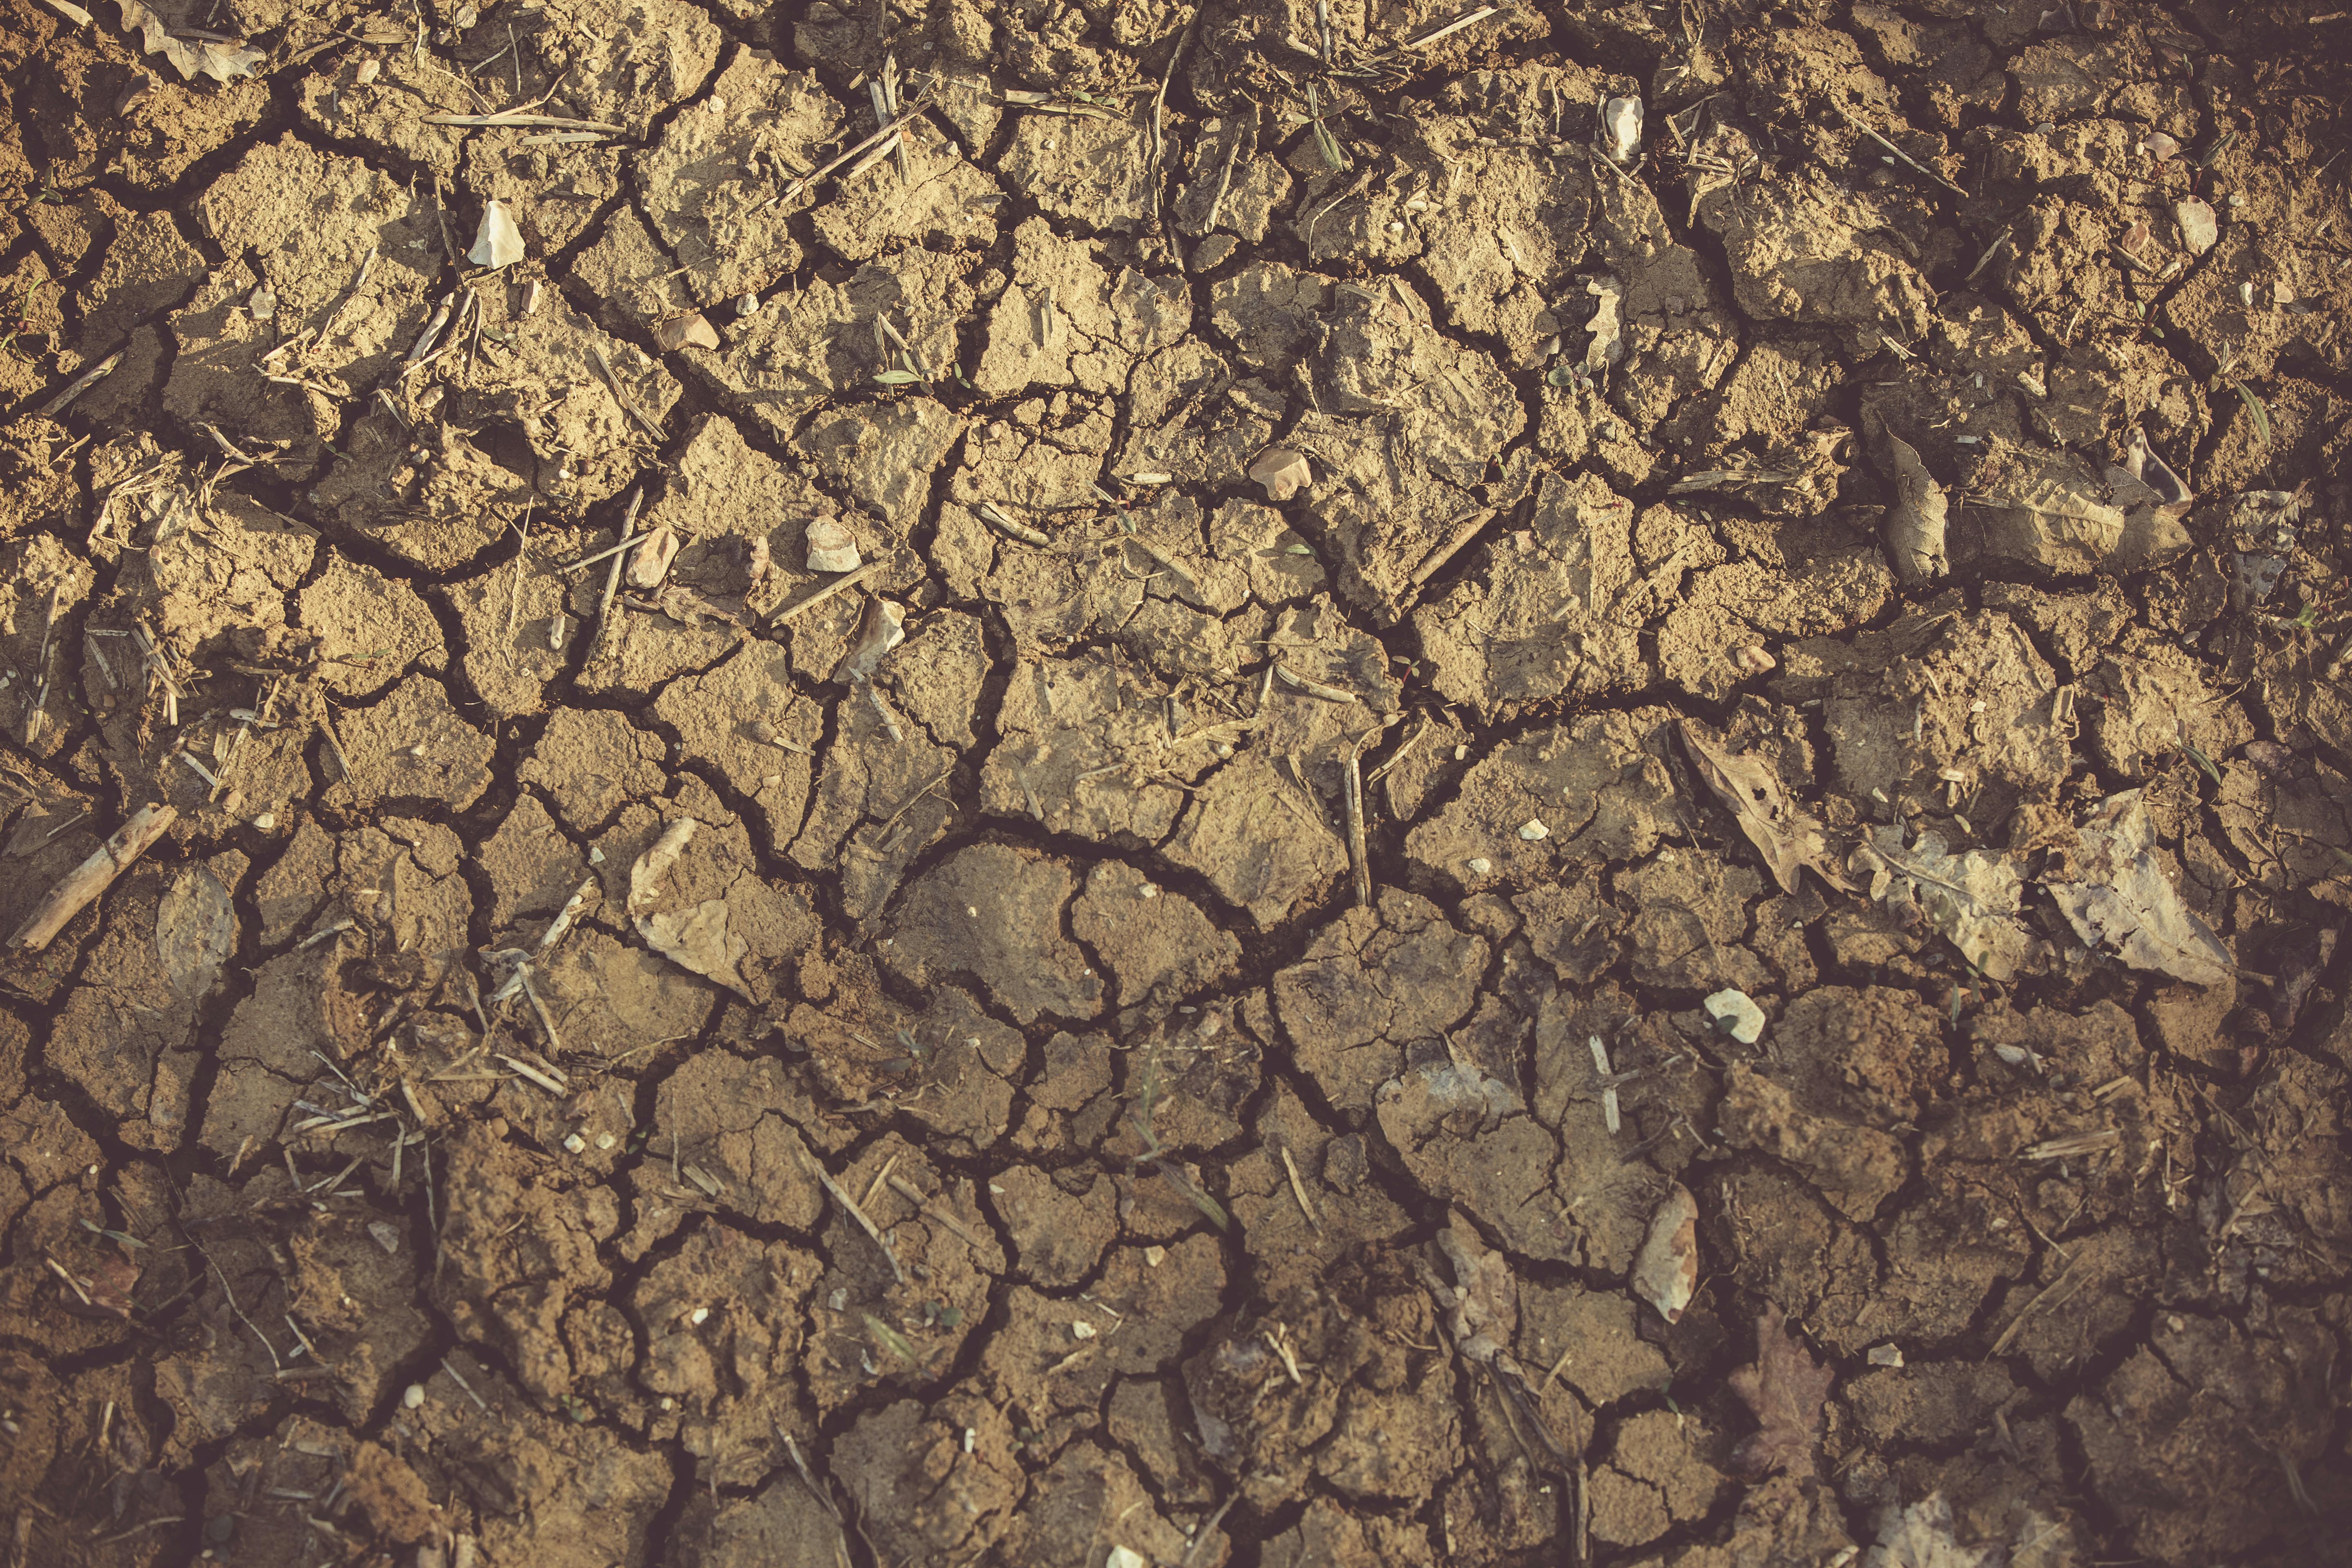 HD wallpaper: drought, cracks, dry, landscape, mud, dehydrated, lack of  water | Wallpaper Flare